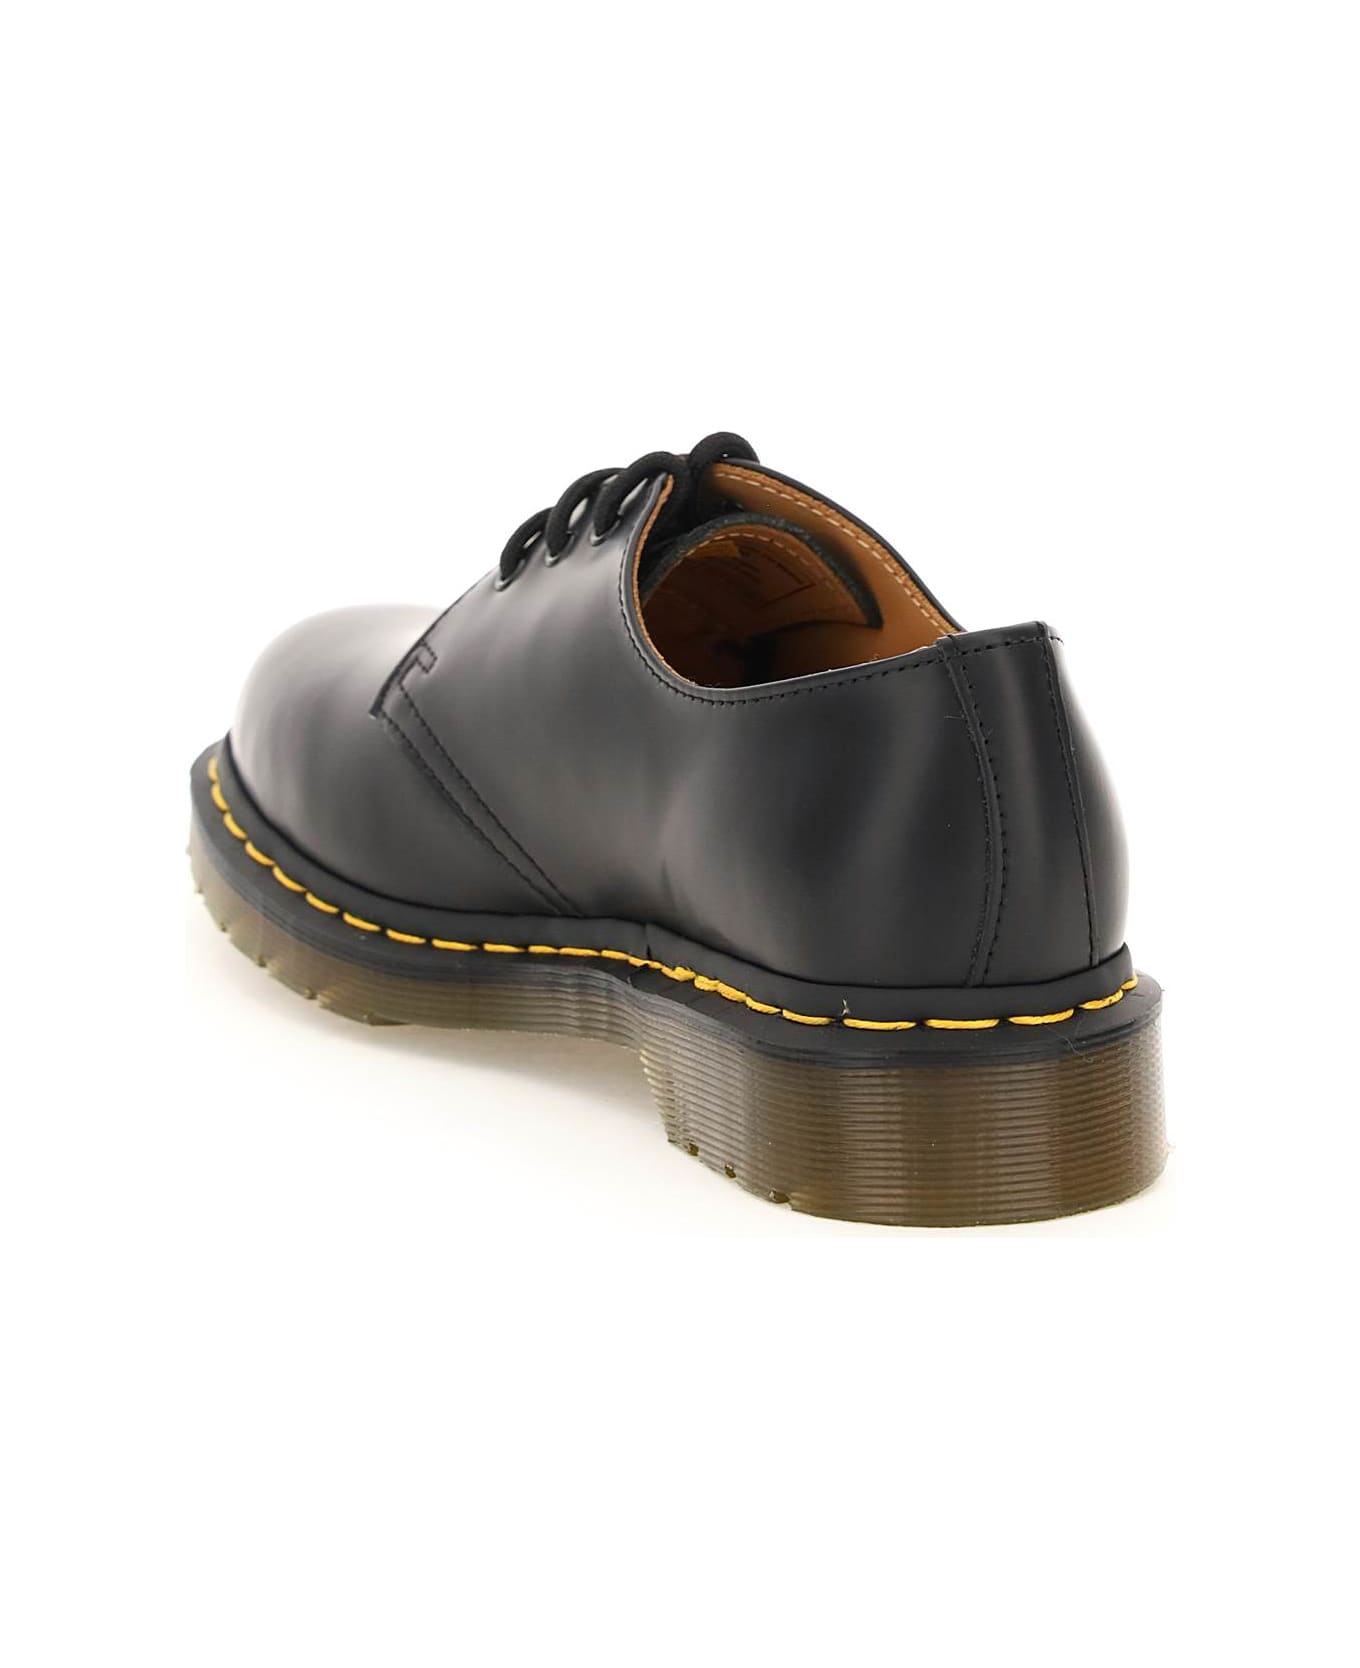 Dr. Martens 1461 Smooth Lace-up Shoes - Black